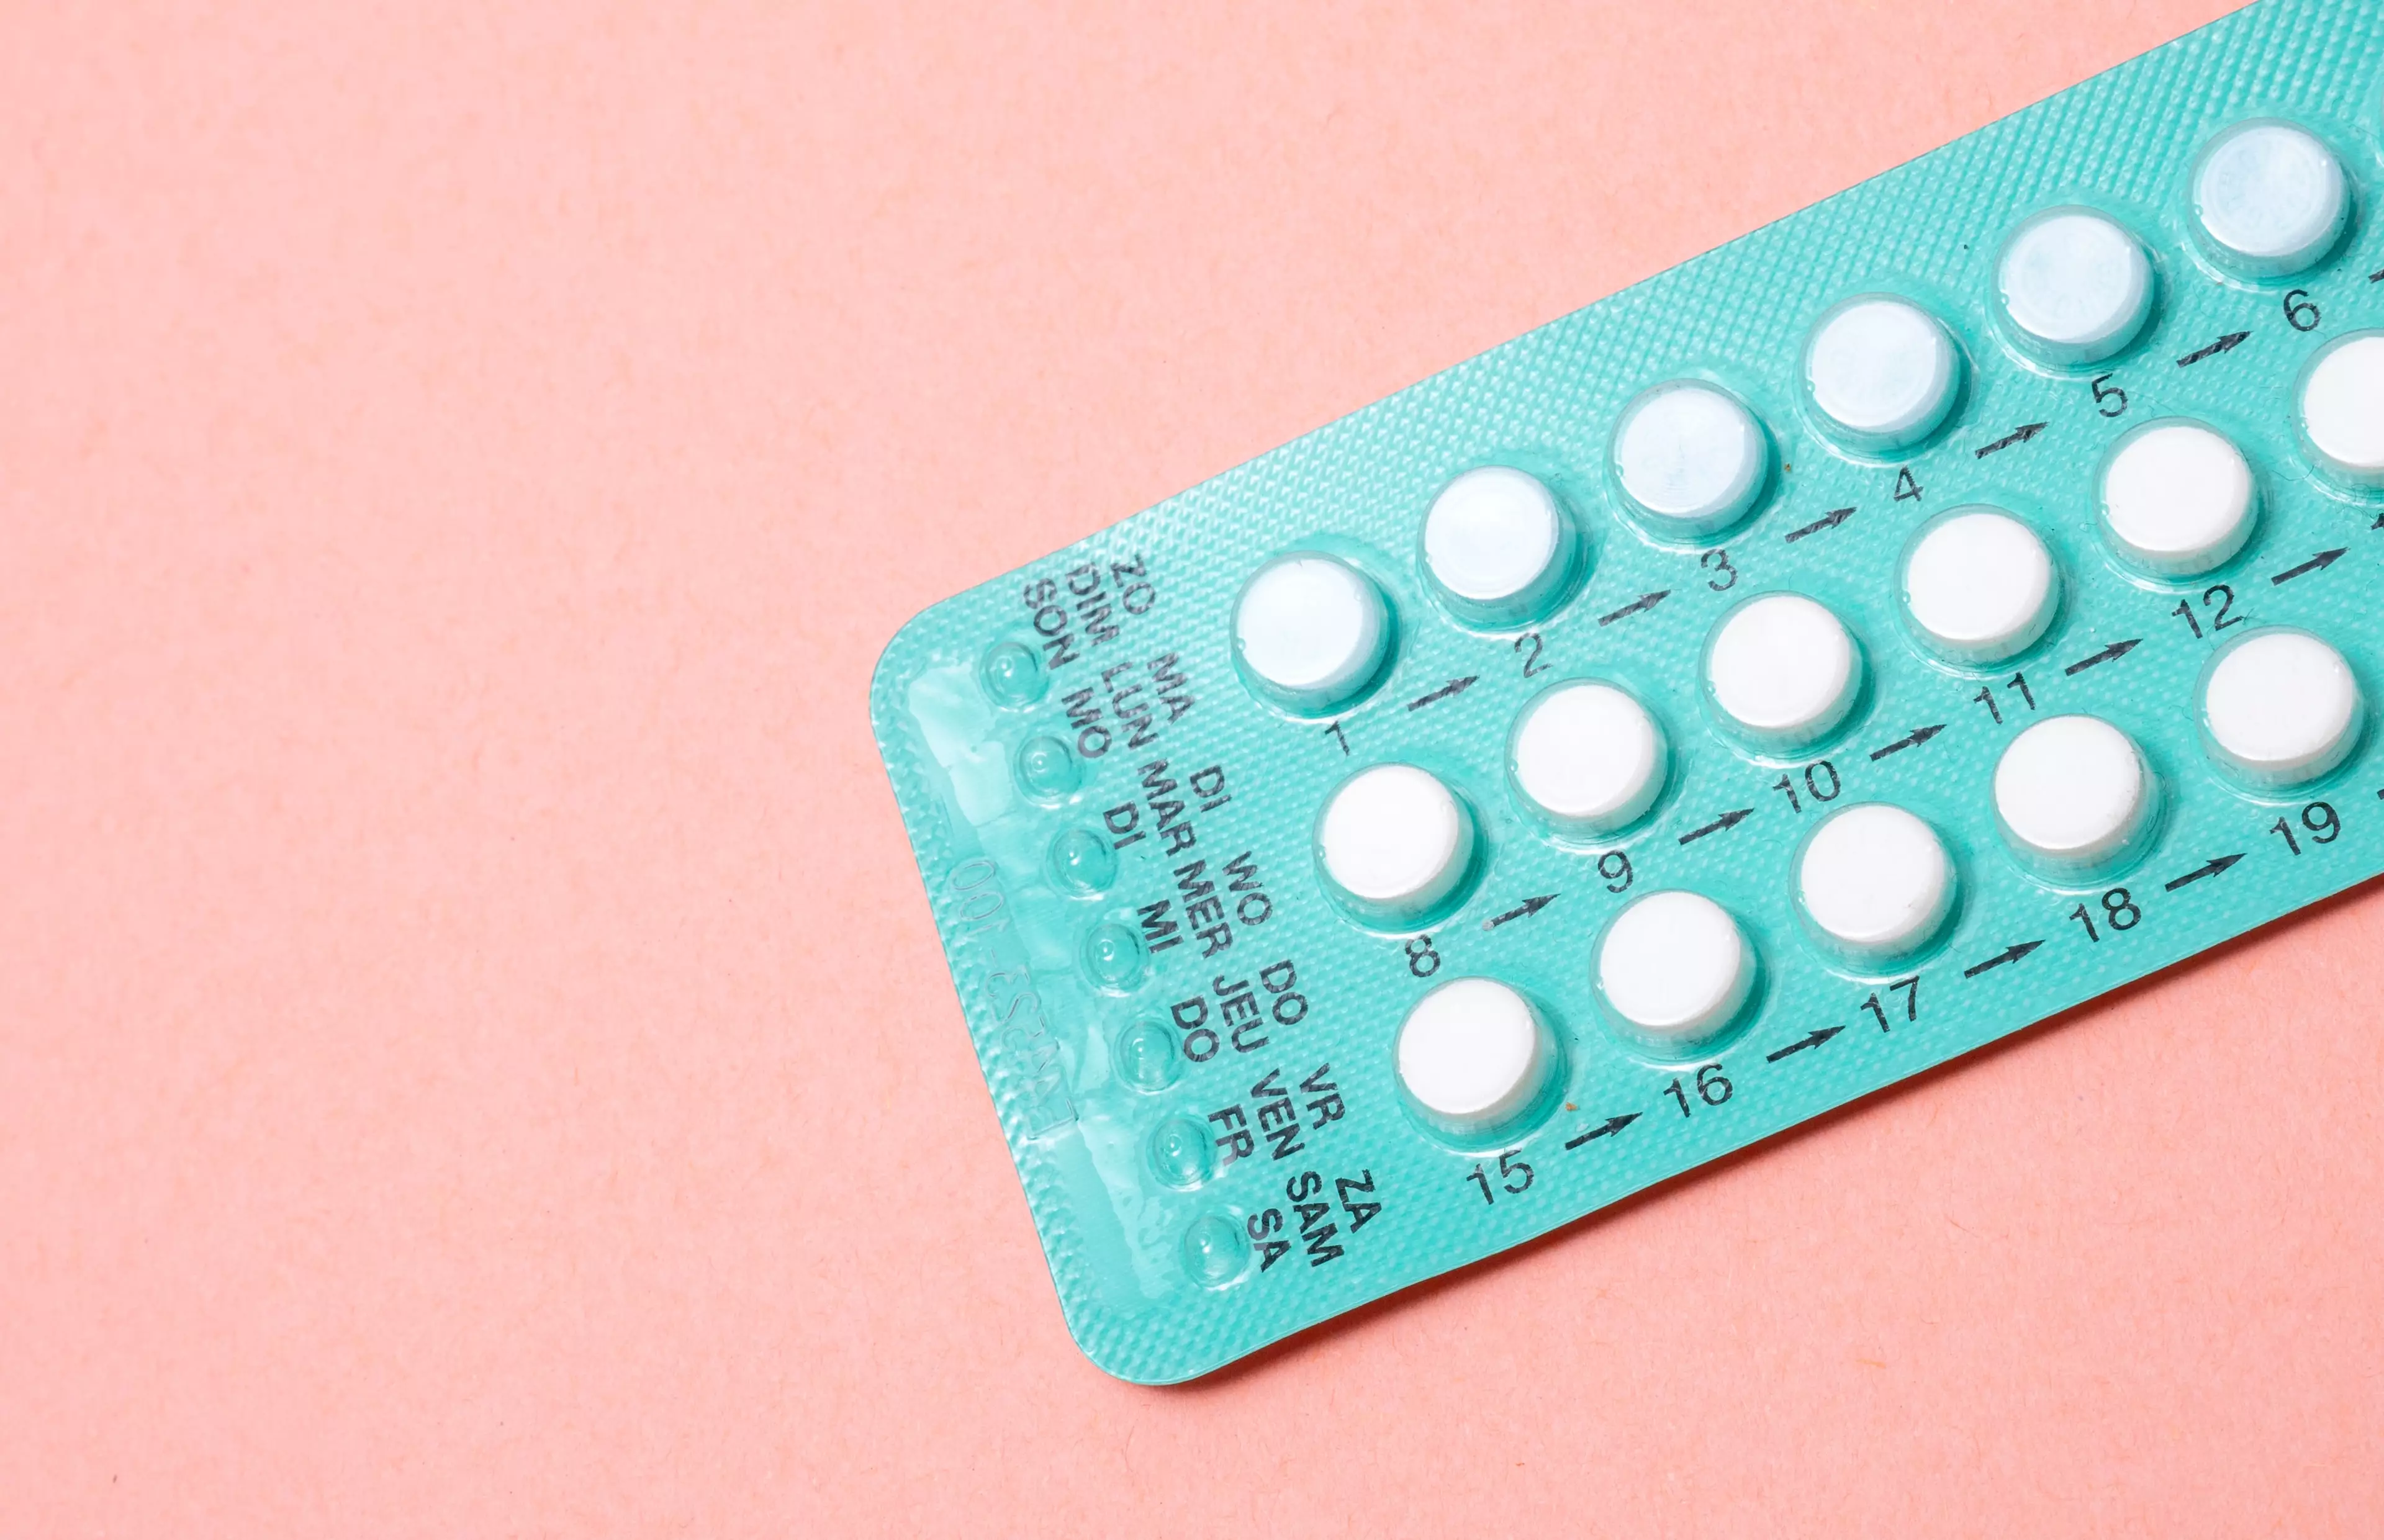 You can still get your regular contraception from GPs (